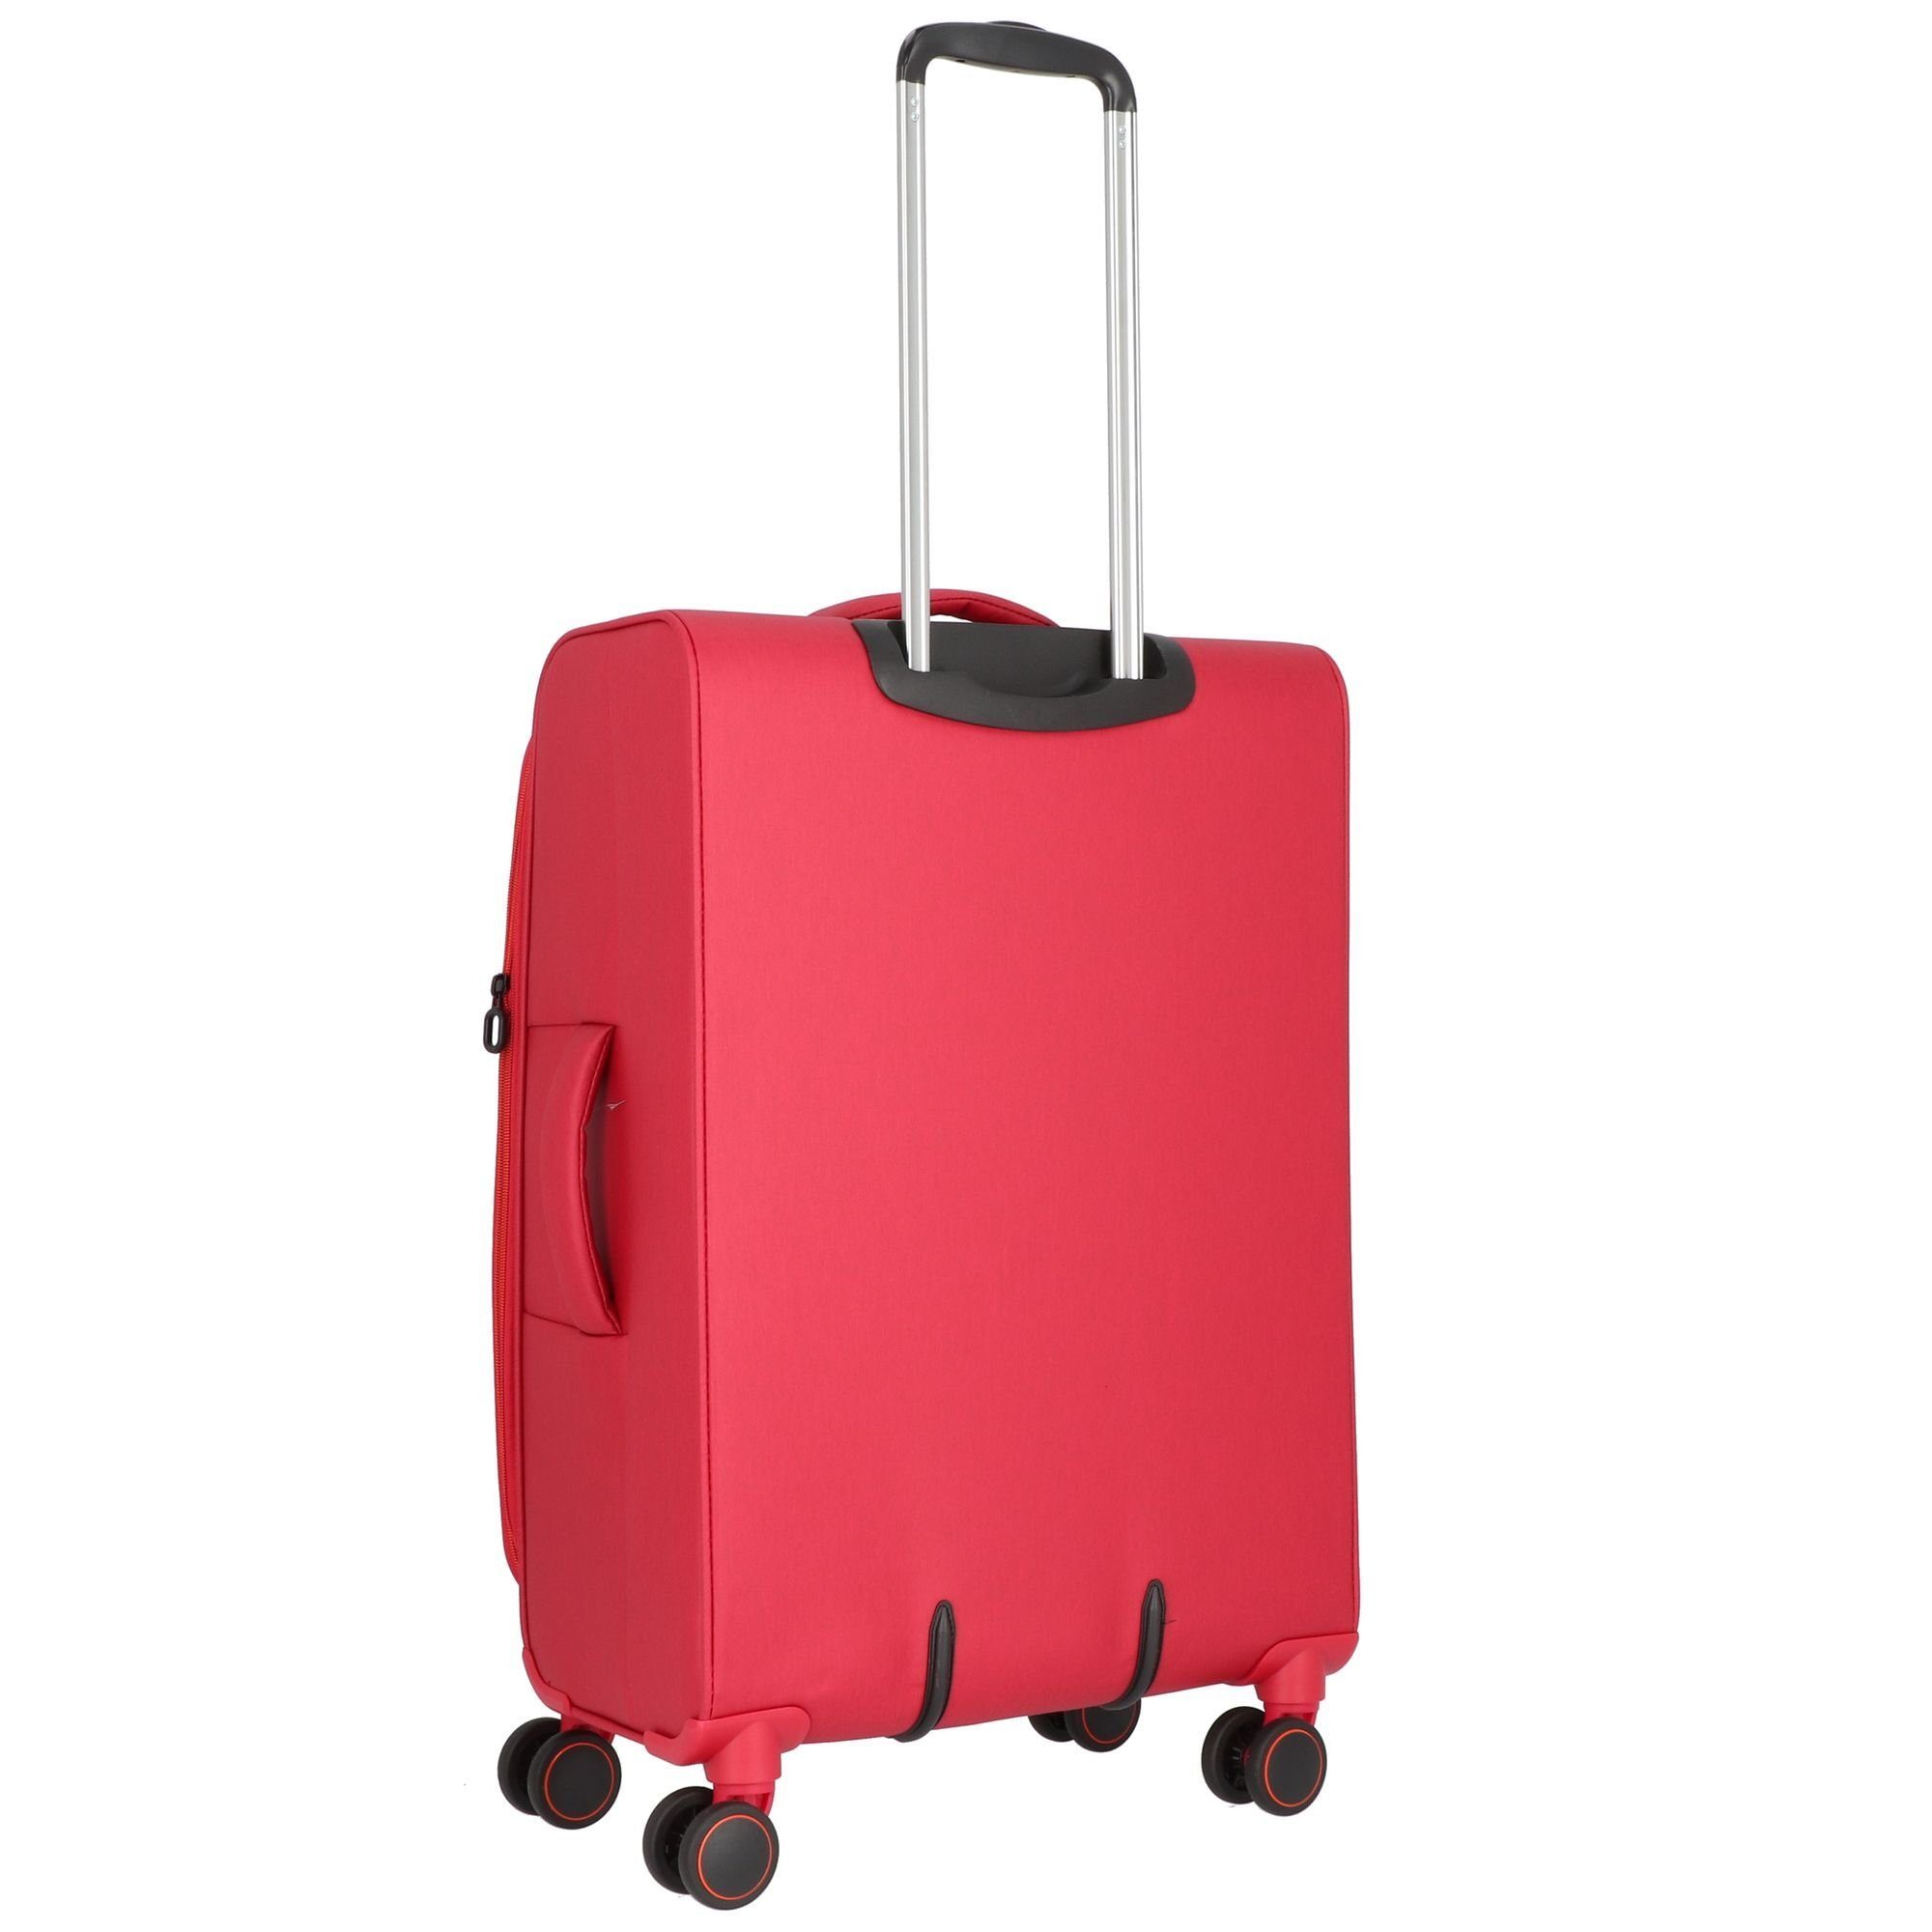 March15 Trading Trolleyset (3-teilig, red 4 Polyester Silhouette, 3 tlg), Rollen